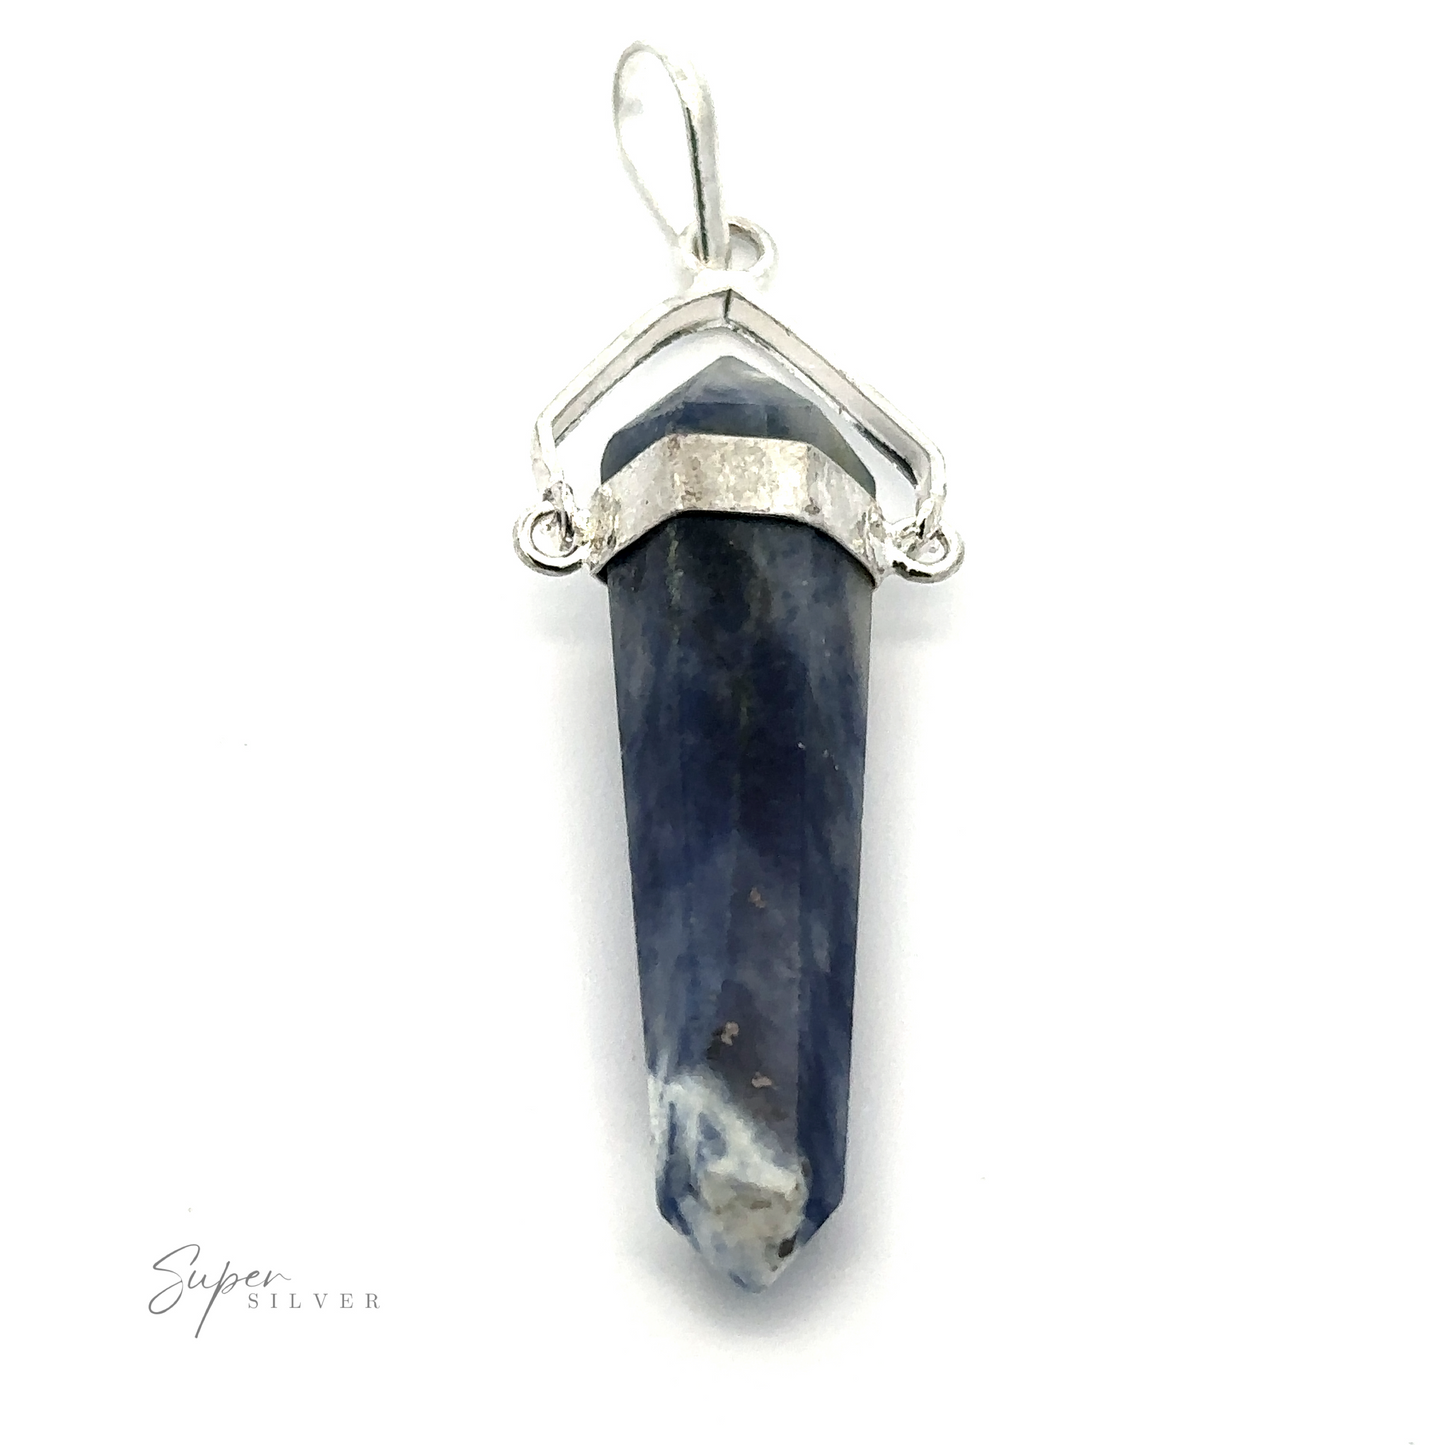 
                  
                    A Raw Stone Swivel Pendant set in a silver-plated setting with a bail for hanging. The gemstone is faceted with slightly varying shades of blue. The brand name "Super Silver" is visible at the bottom left, adding an elegant touch.
                  
                